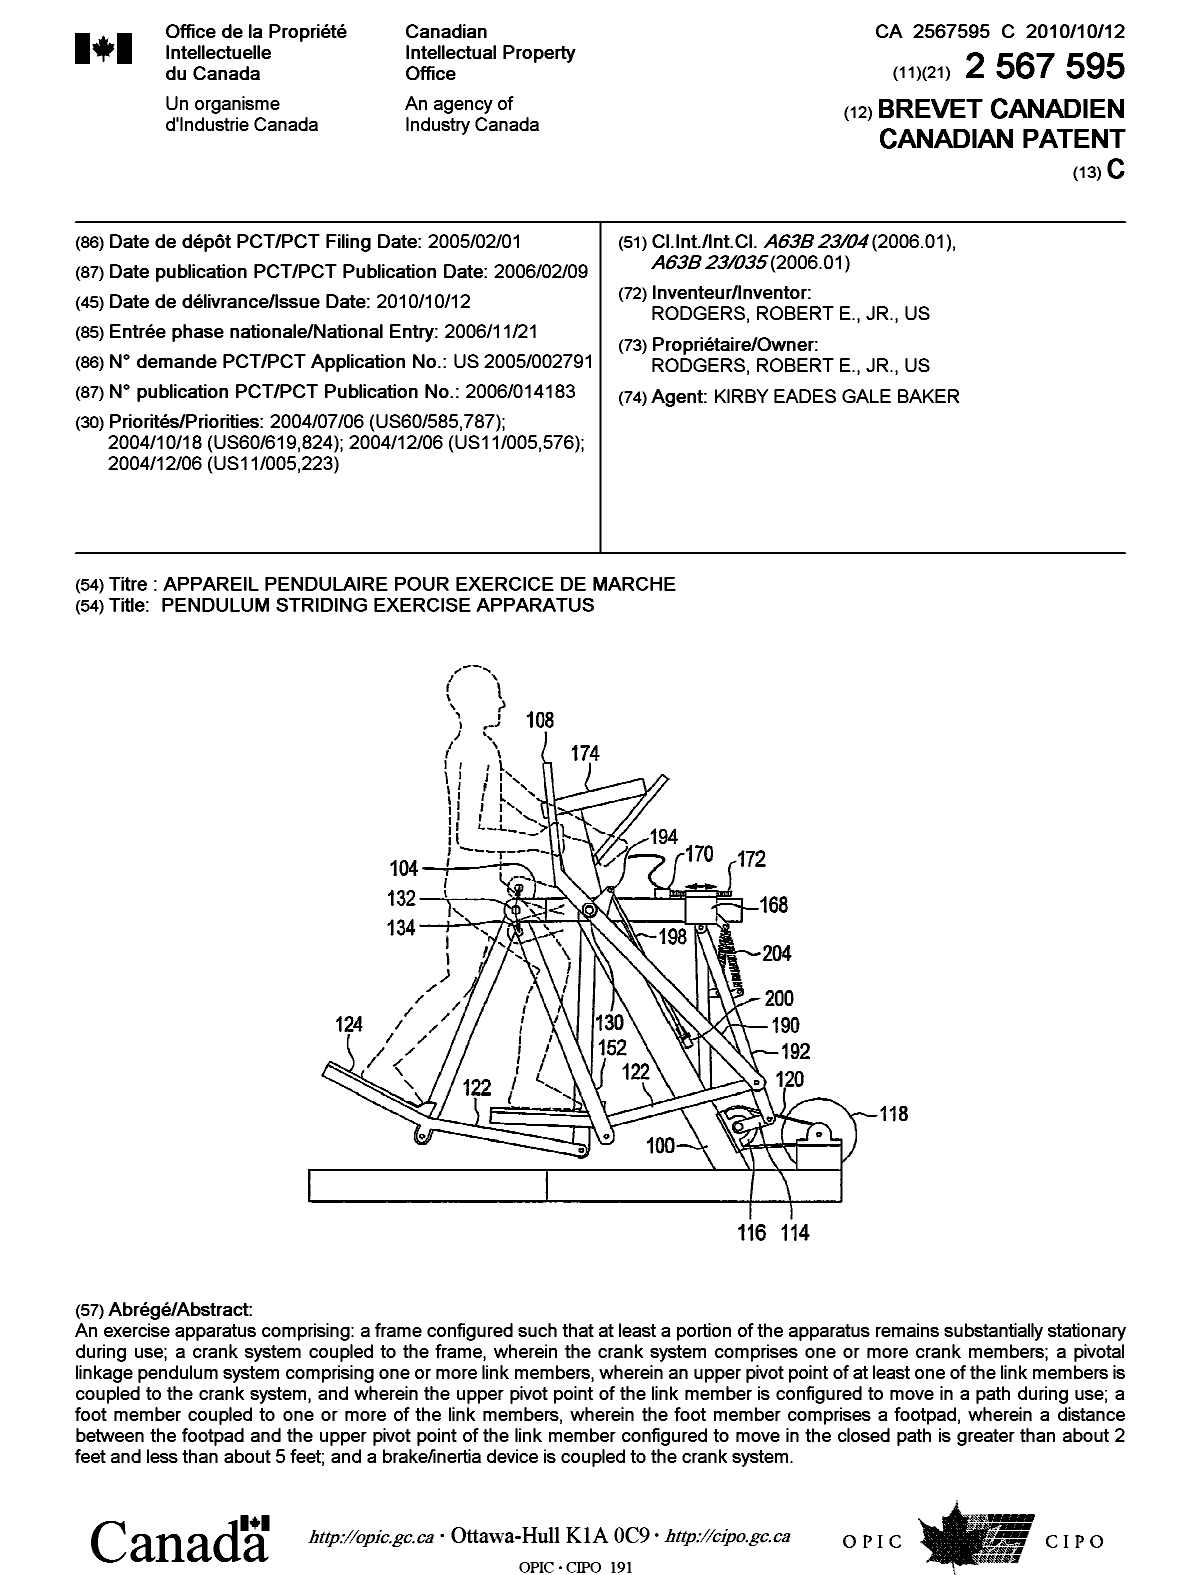 Canadian Patent Document 2567595. Cover Page 20100915. Image 1 of 1